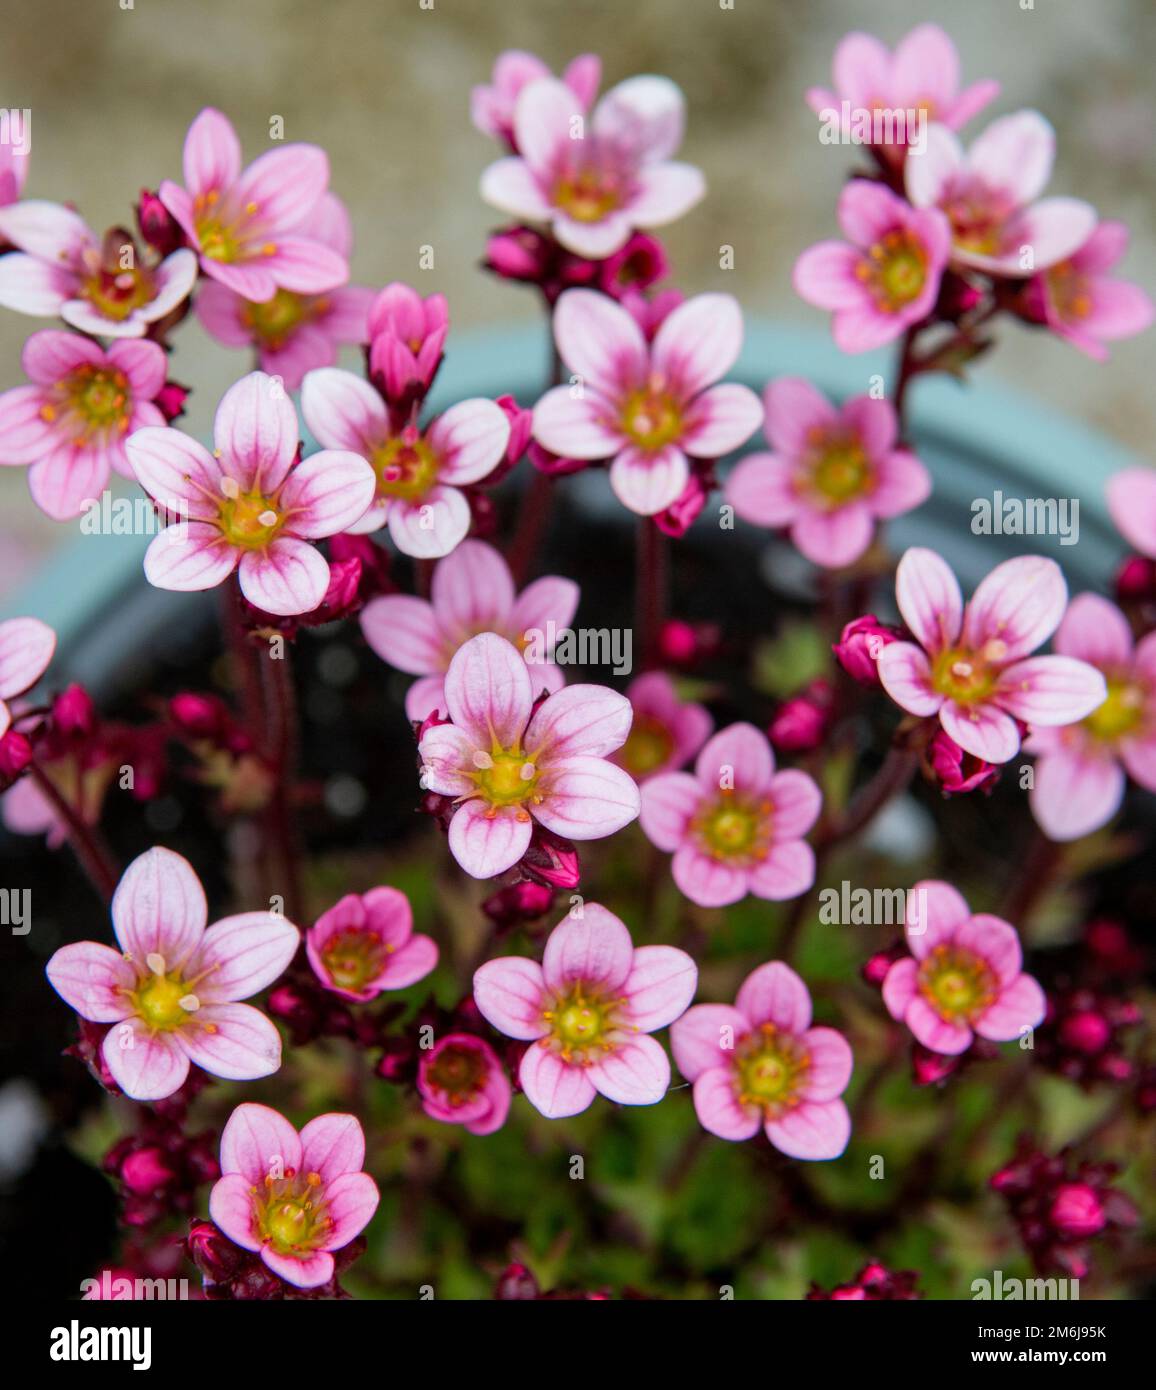 Pink saxifraga flowers in the early spring. Blooming rockfoils in the garden. Selective focus. Stock Photo